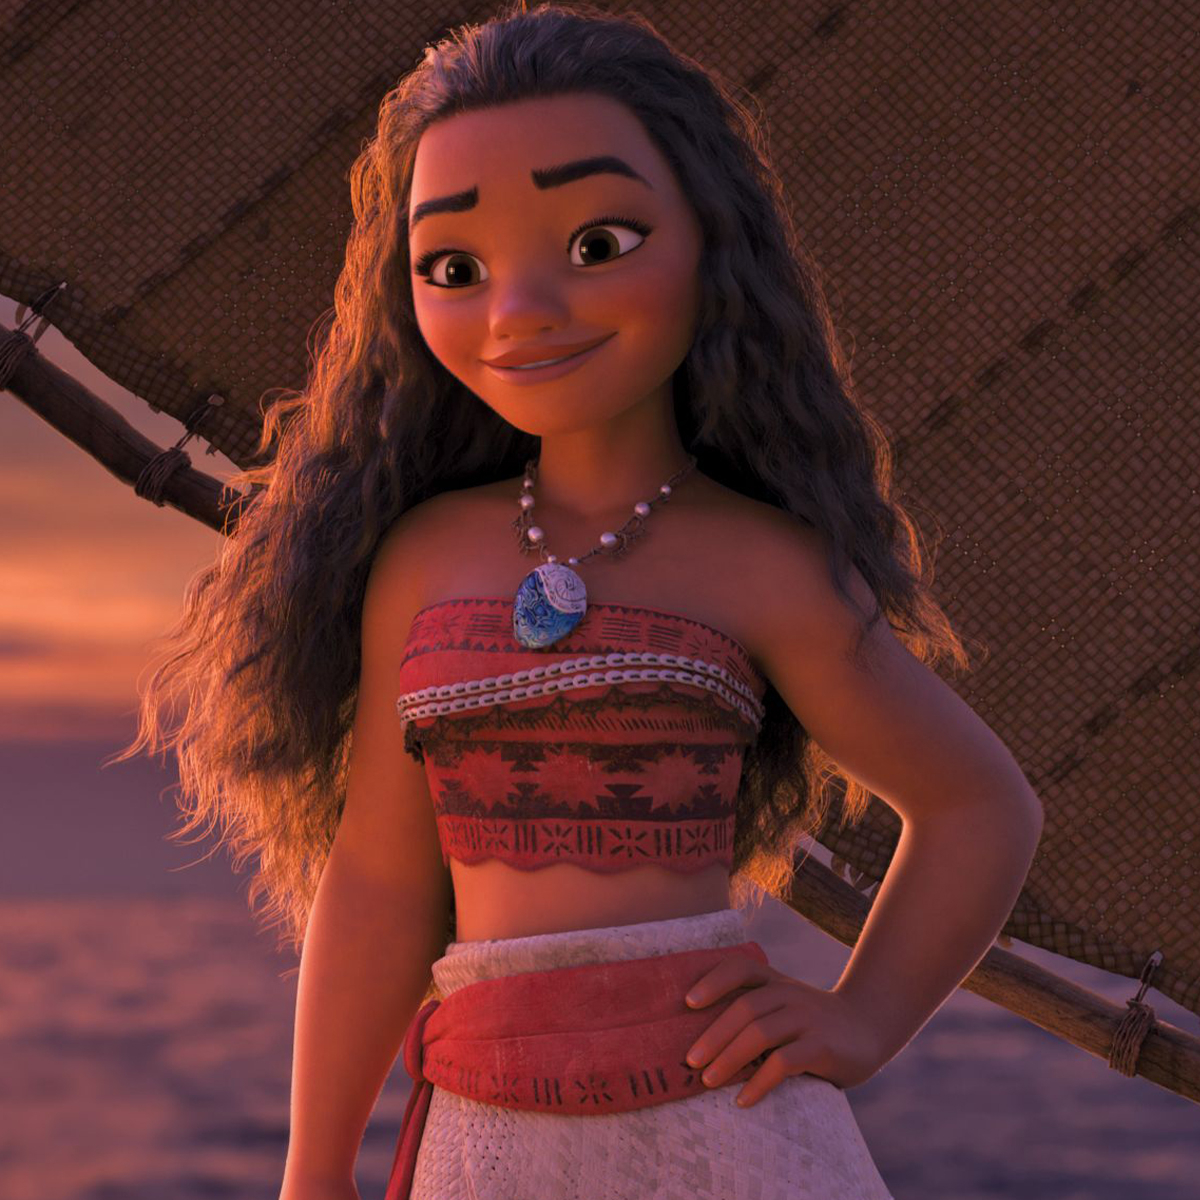 Moana' Live-Action Remake in the Works From Disney, Dwayne Johnson – The  Hollywood Reporter